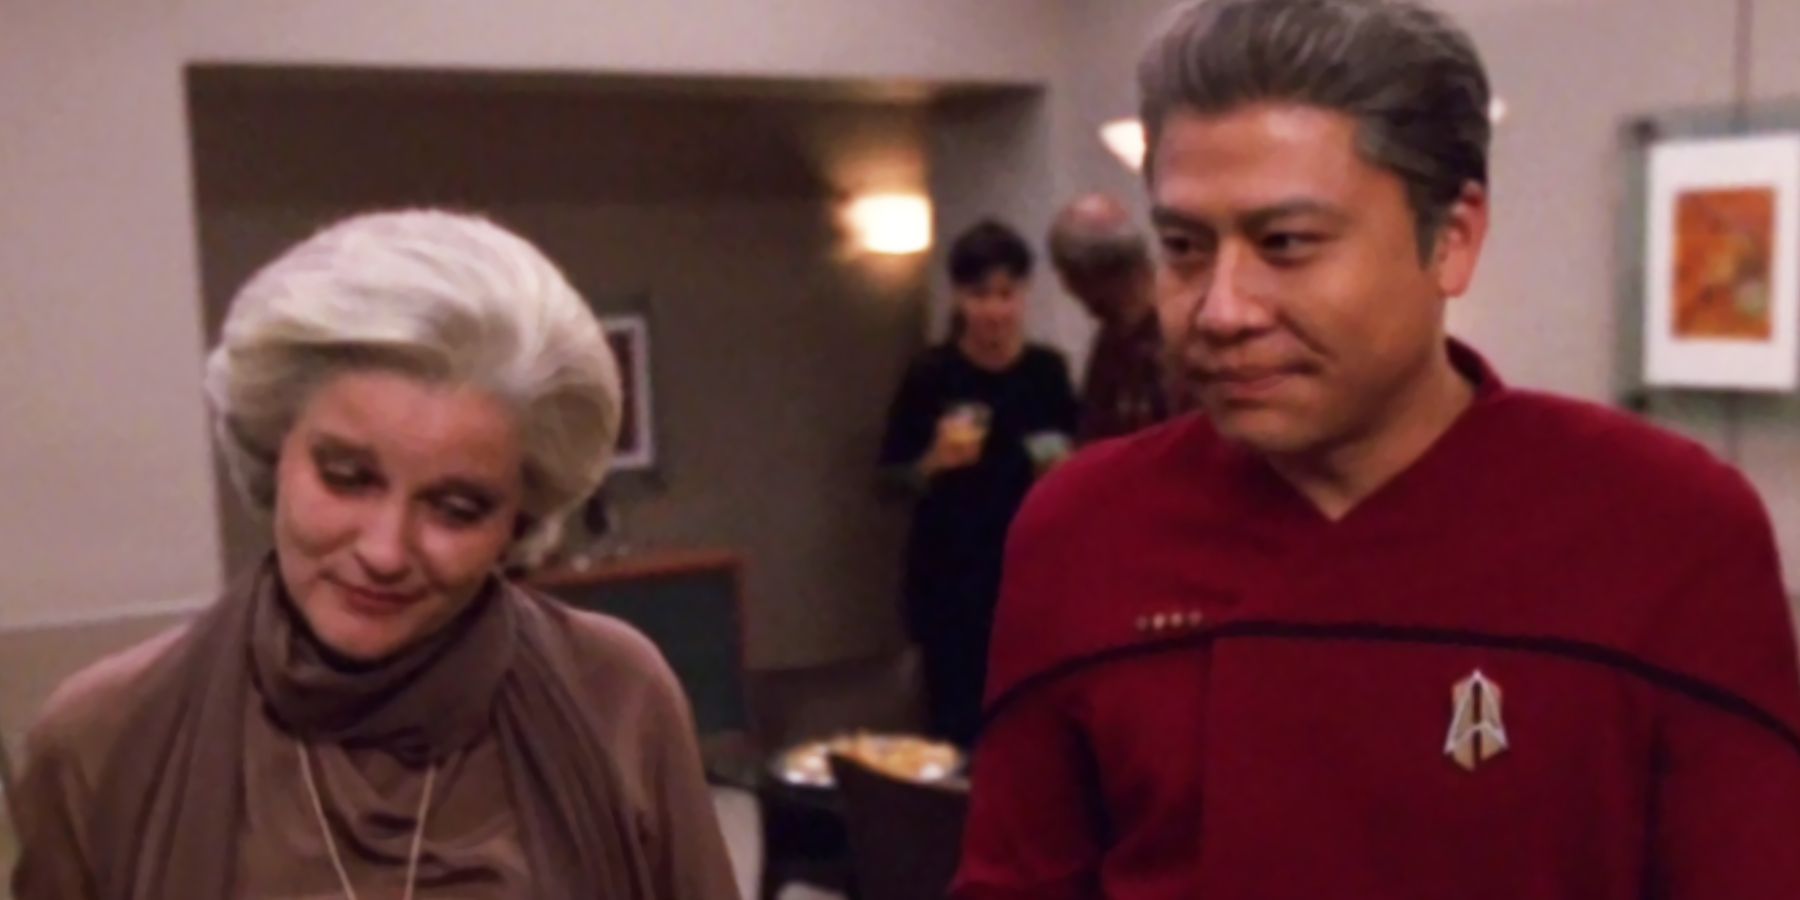 Harry Kim In Prodigy? What This Means For Voyager’s Star Trek Future